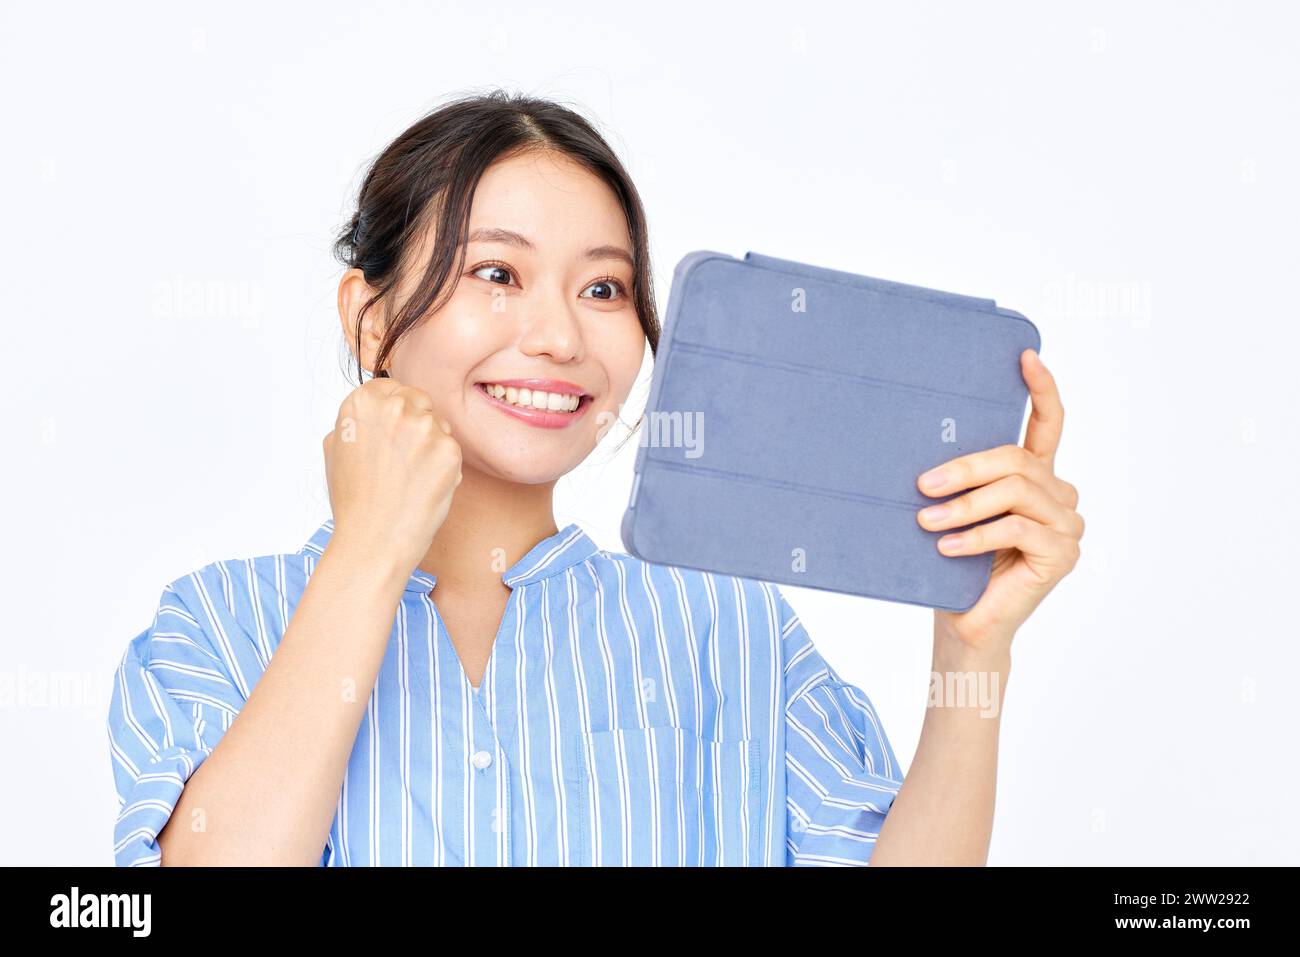 A woman holding a tablet computer in front of her face Stock Photo